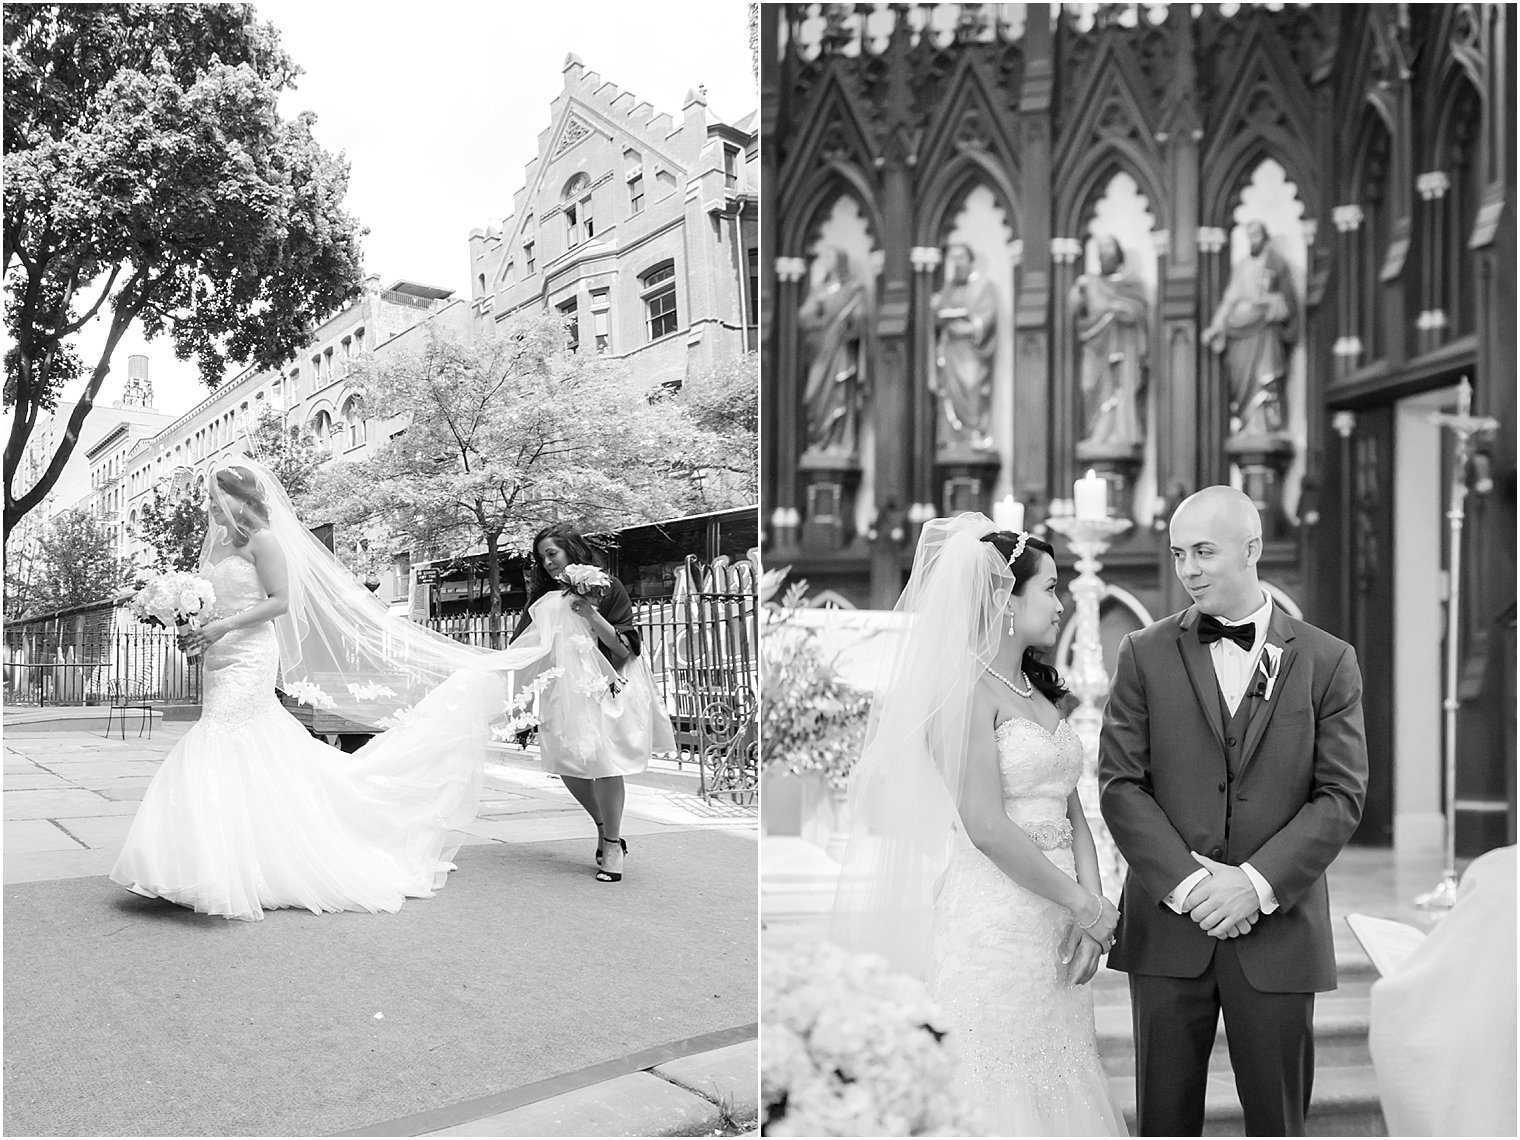 Wedding Ceremony at old St. Patrick's Cathedral, NYC